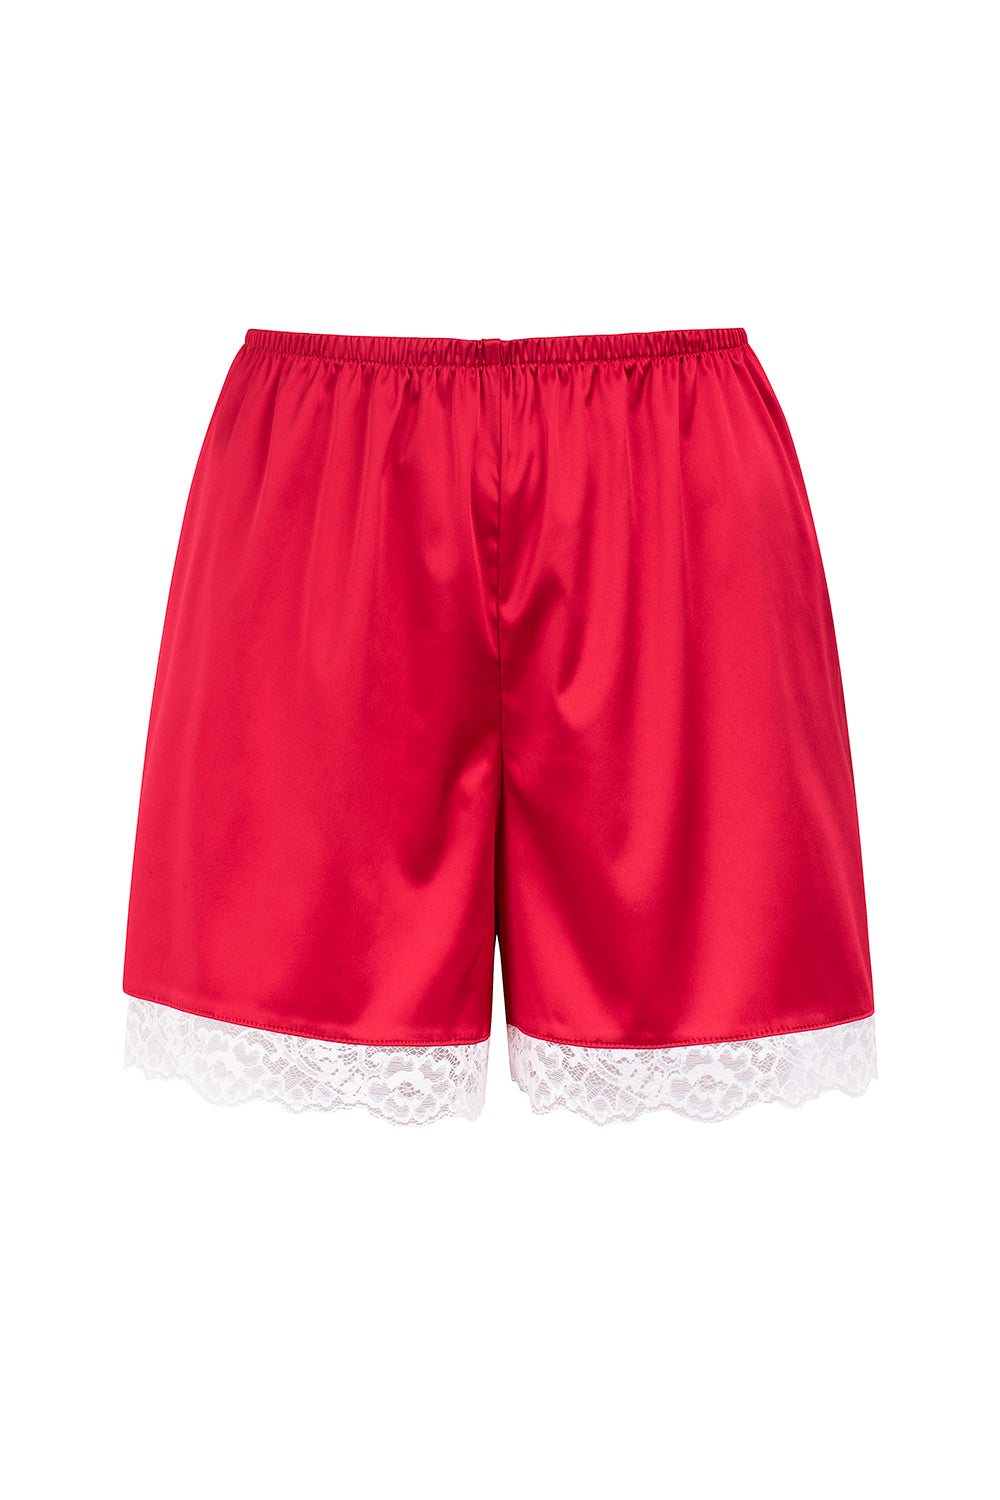 RED SATIN & LACE SHORTS